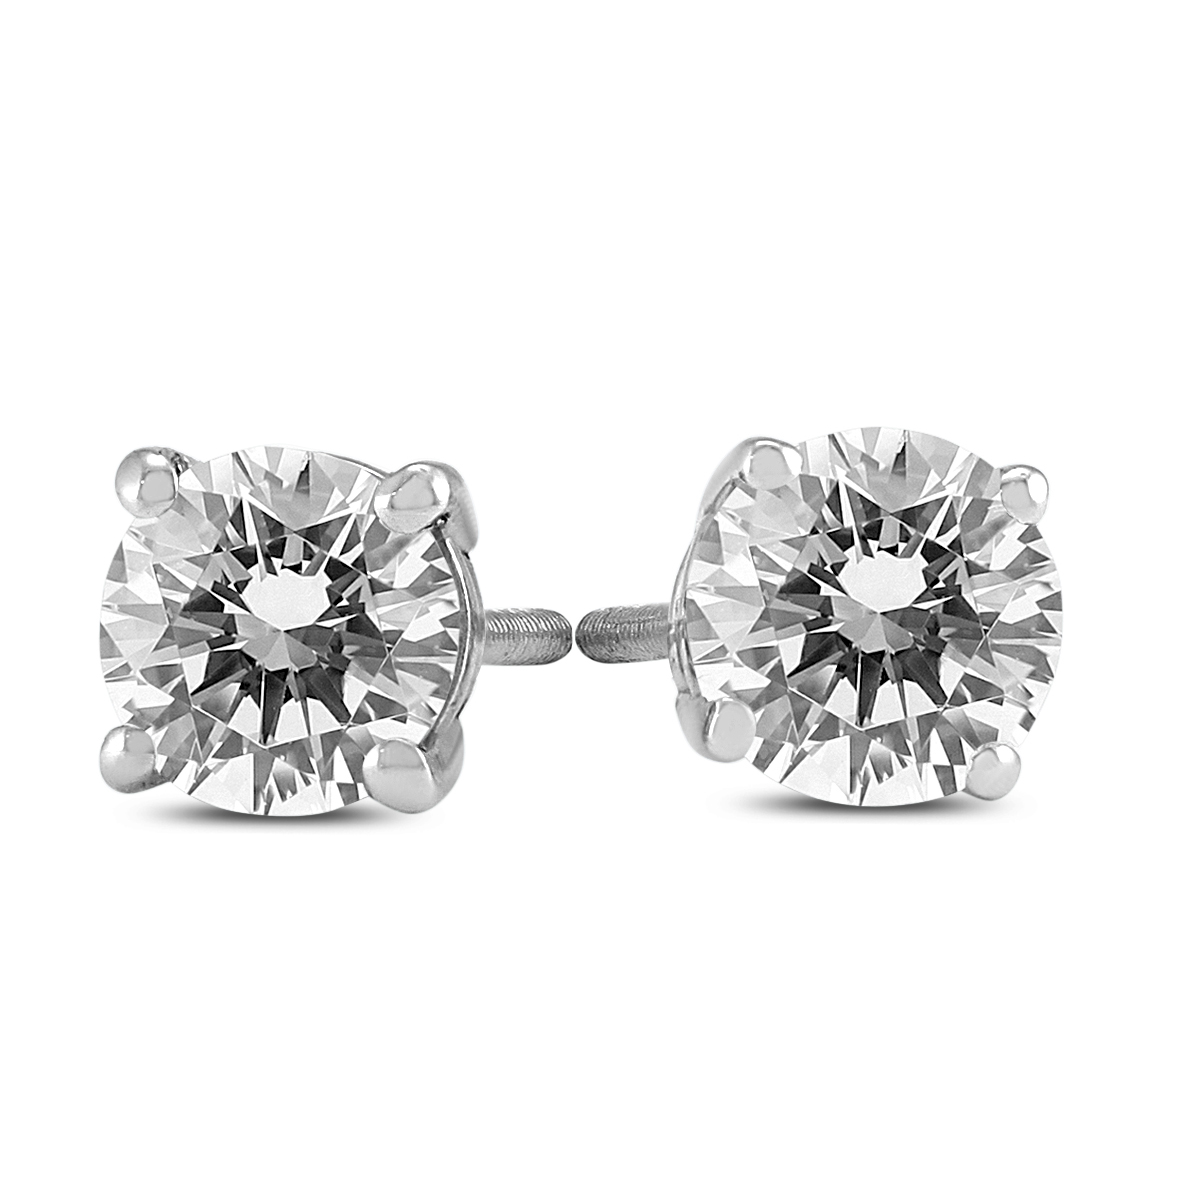 3/4 Carat TW AGS Certified Round Diamond Solitaire Stud Earrings in 14K White Gold (I-J Color, SI1-SI2 Clarity)